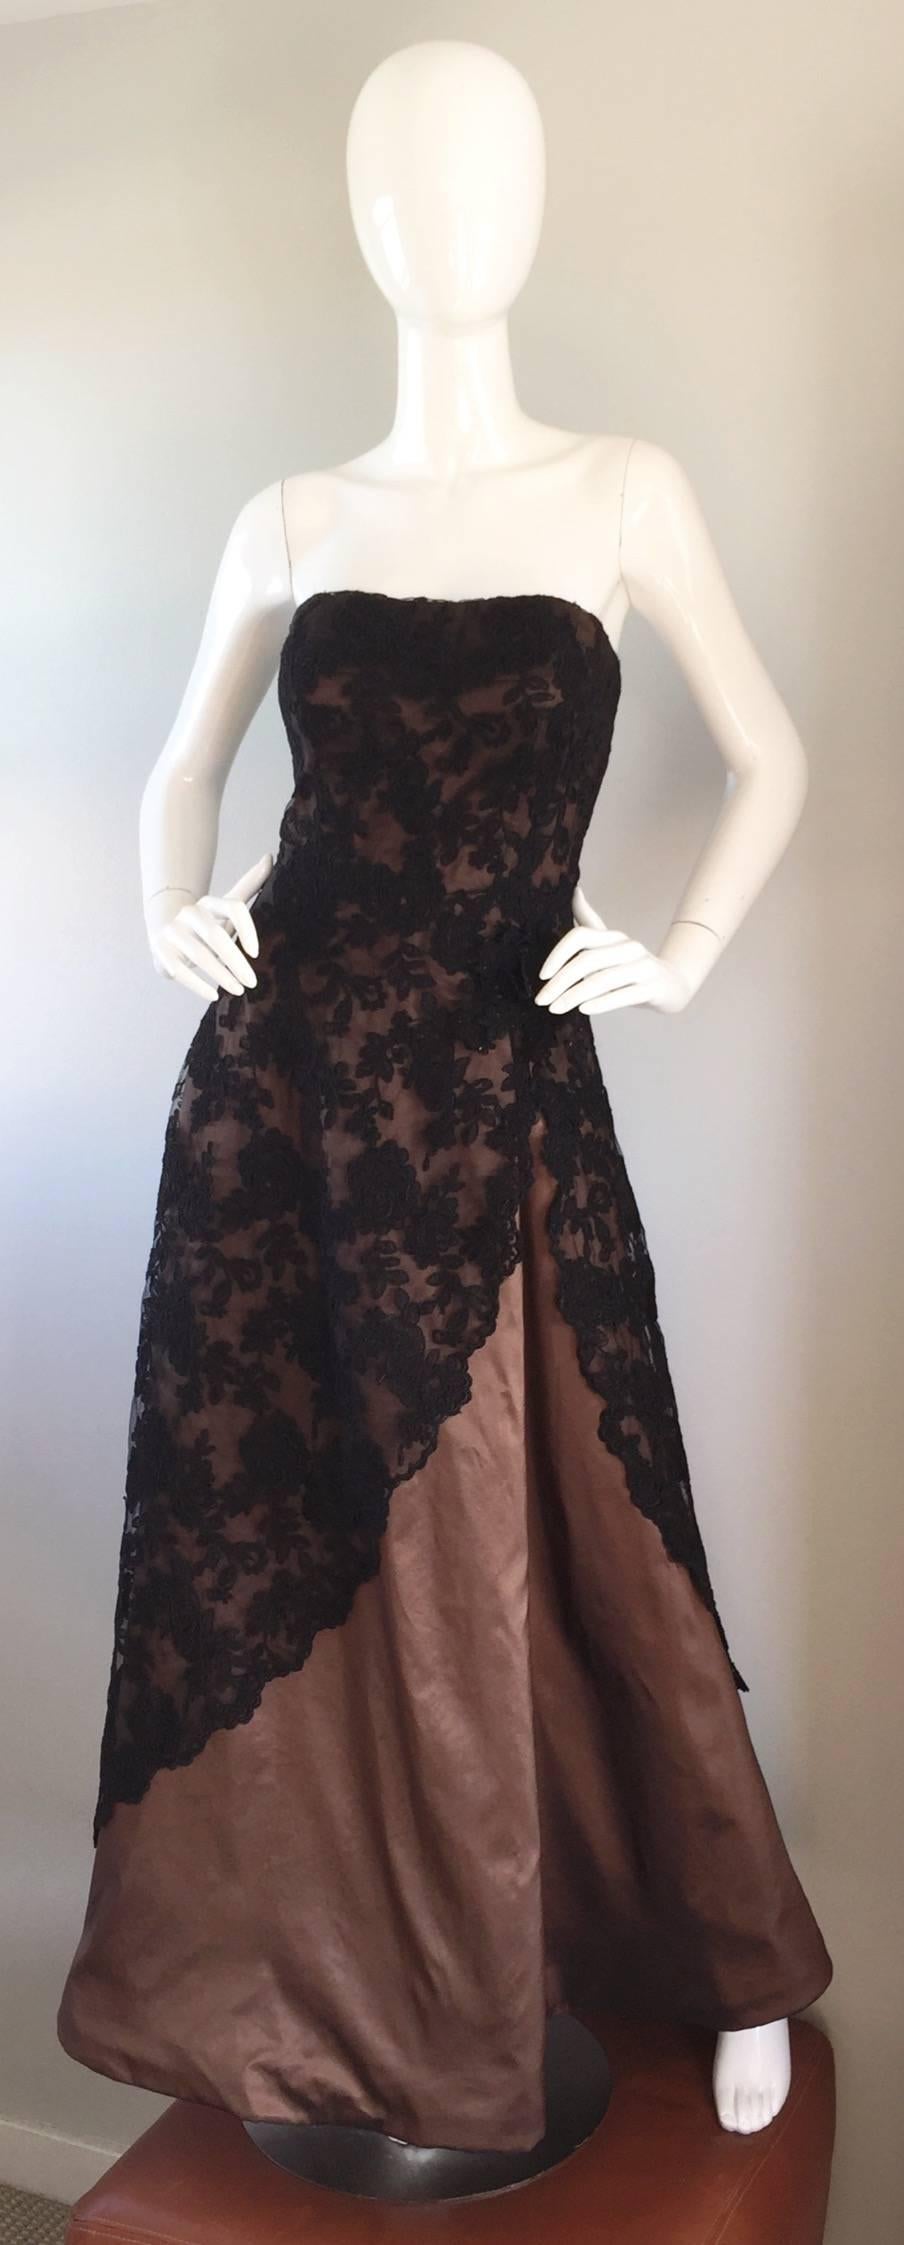 Insanely gorgeous vintage ROSE TAFT black and brown 1950s 50s style couture strapless gown! Features a full brown silk satin gown, with an attached black silk French lace overlay. Black lace appliqué at side waist, encrusted with seed beads. Hidden